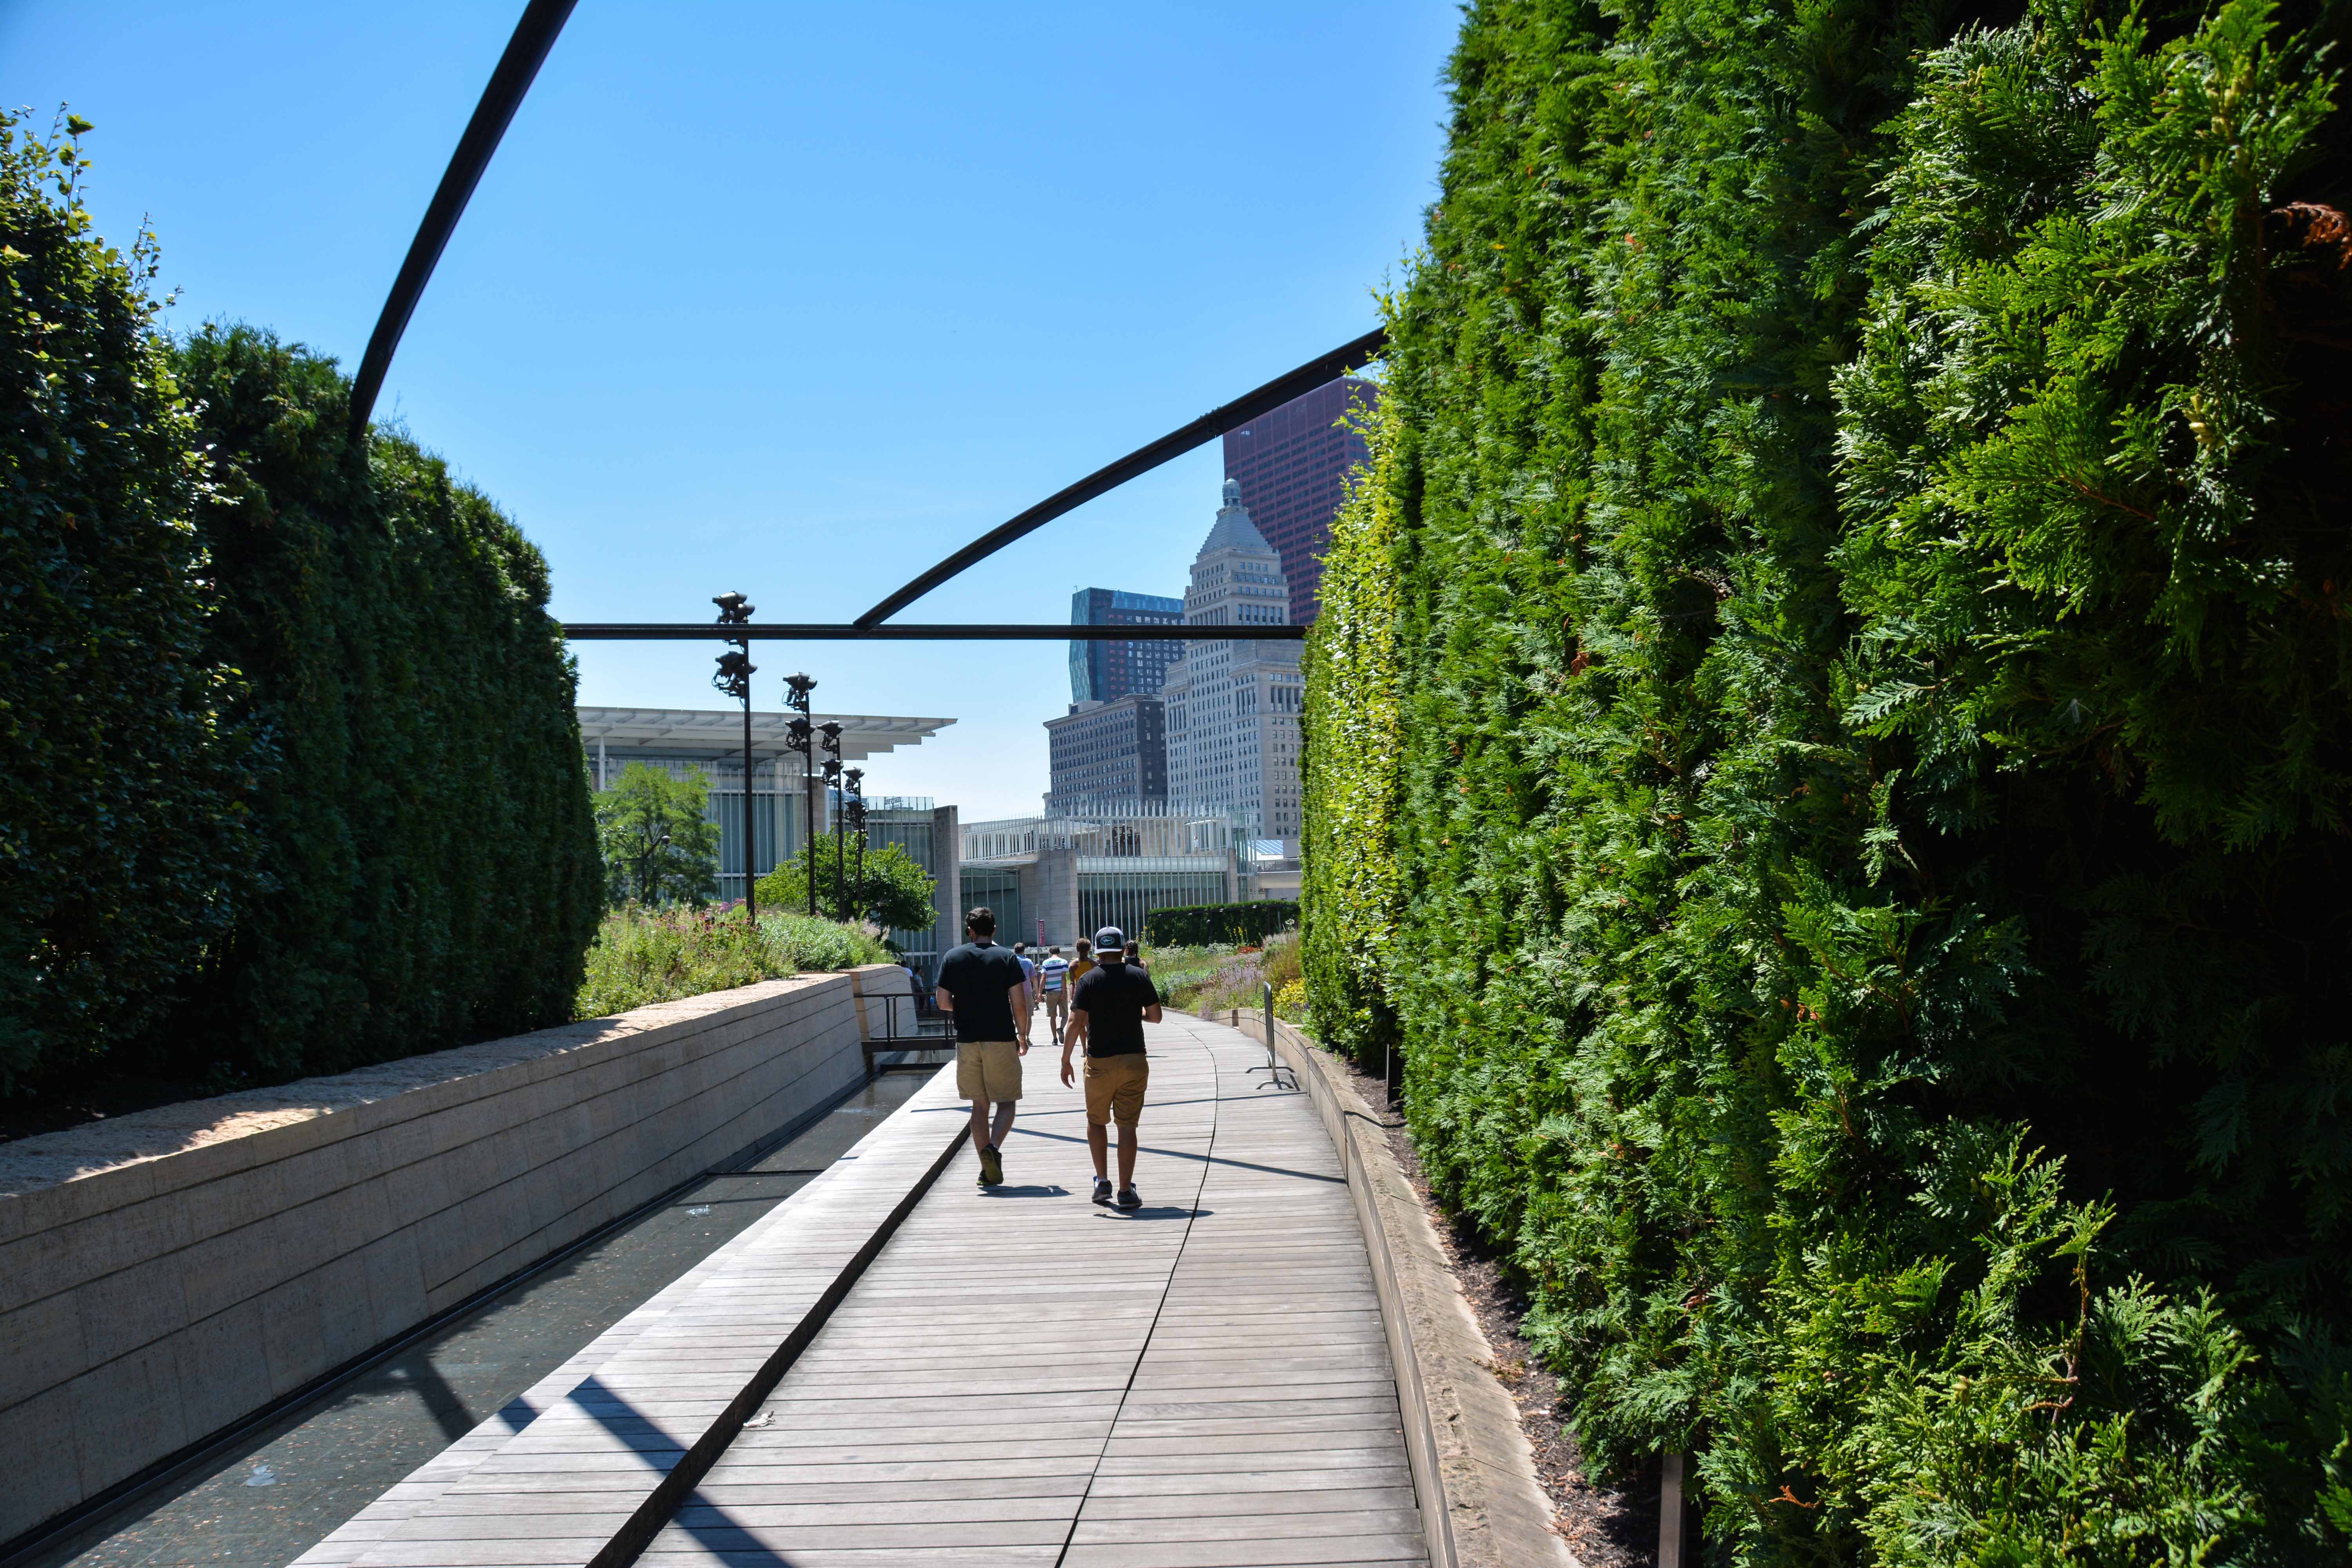 The Lurie Garden - Our Great Midwest Road Trip, Thinking Outside the Boxwood